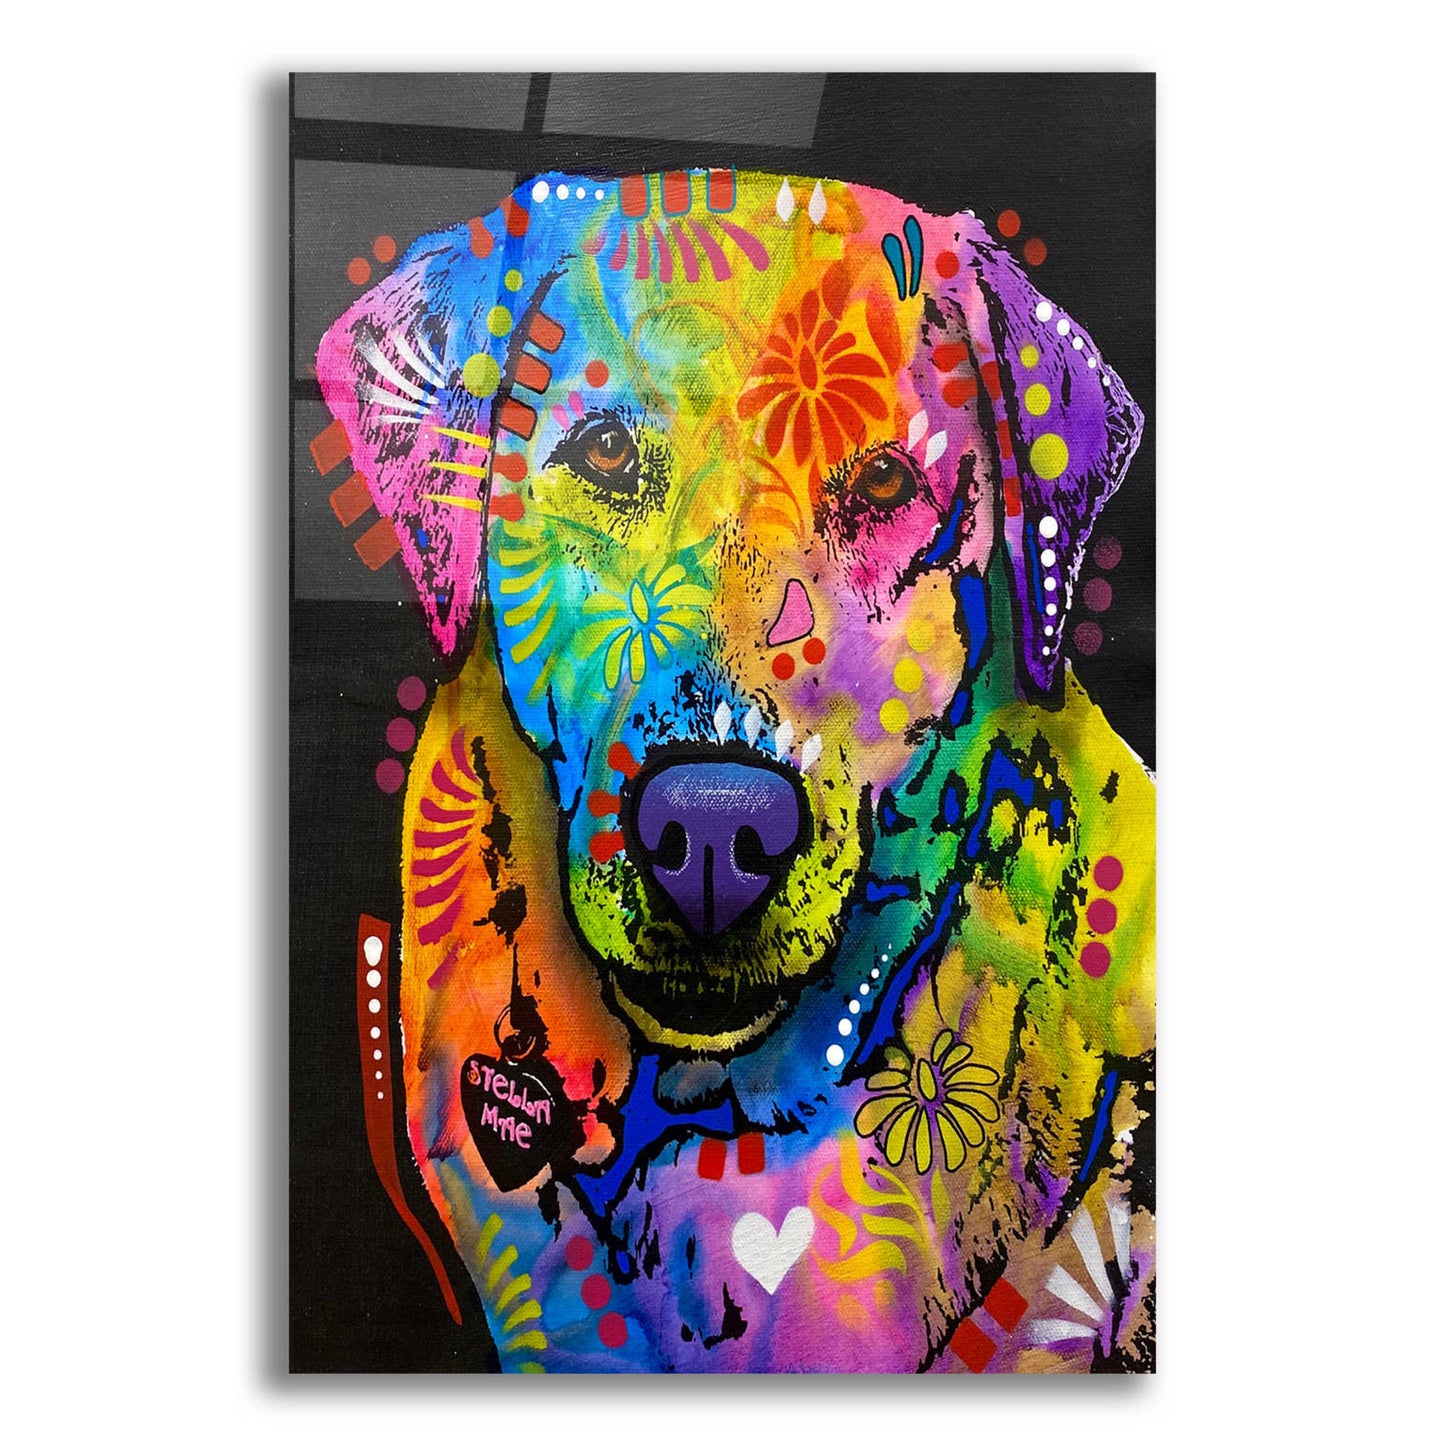 Epic Art 'Don't Do A Thing But Run Around' by Dean Russo, Acrylic Glass Wall Art